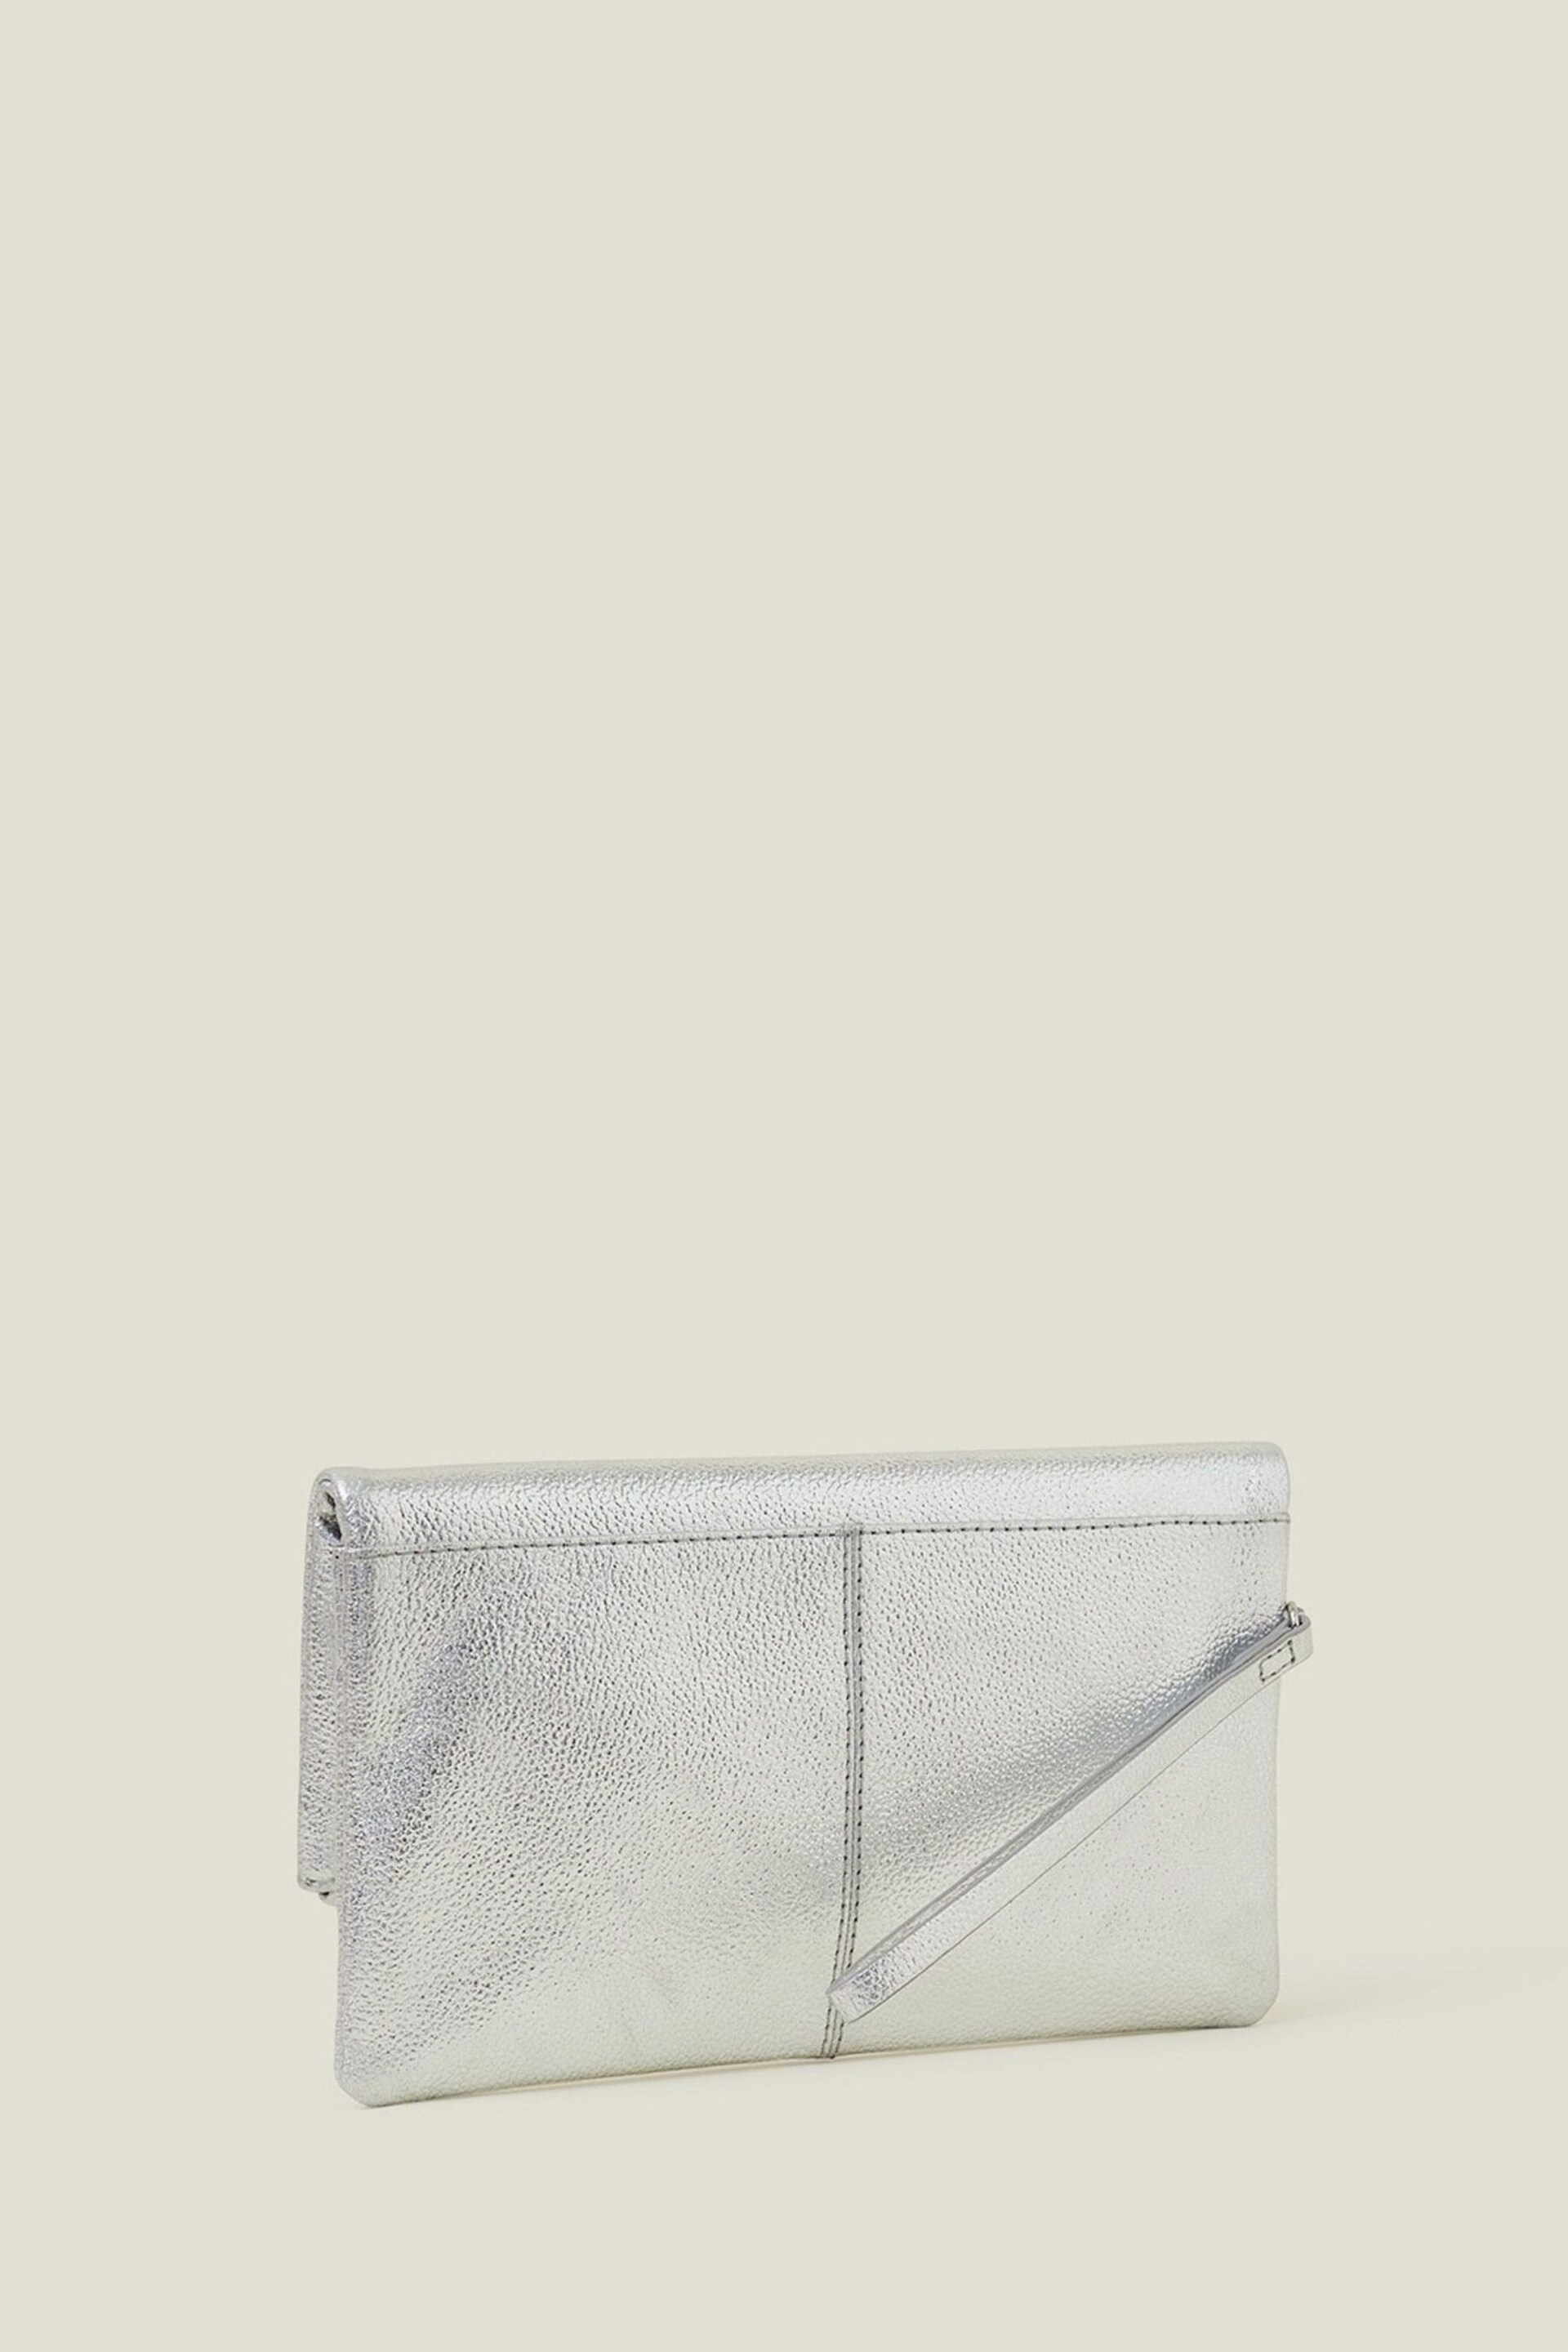 Accessorize Silver Leather Fold Over Clutch - Image 3 of 4